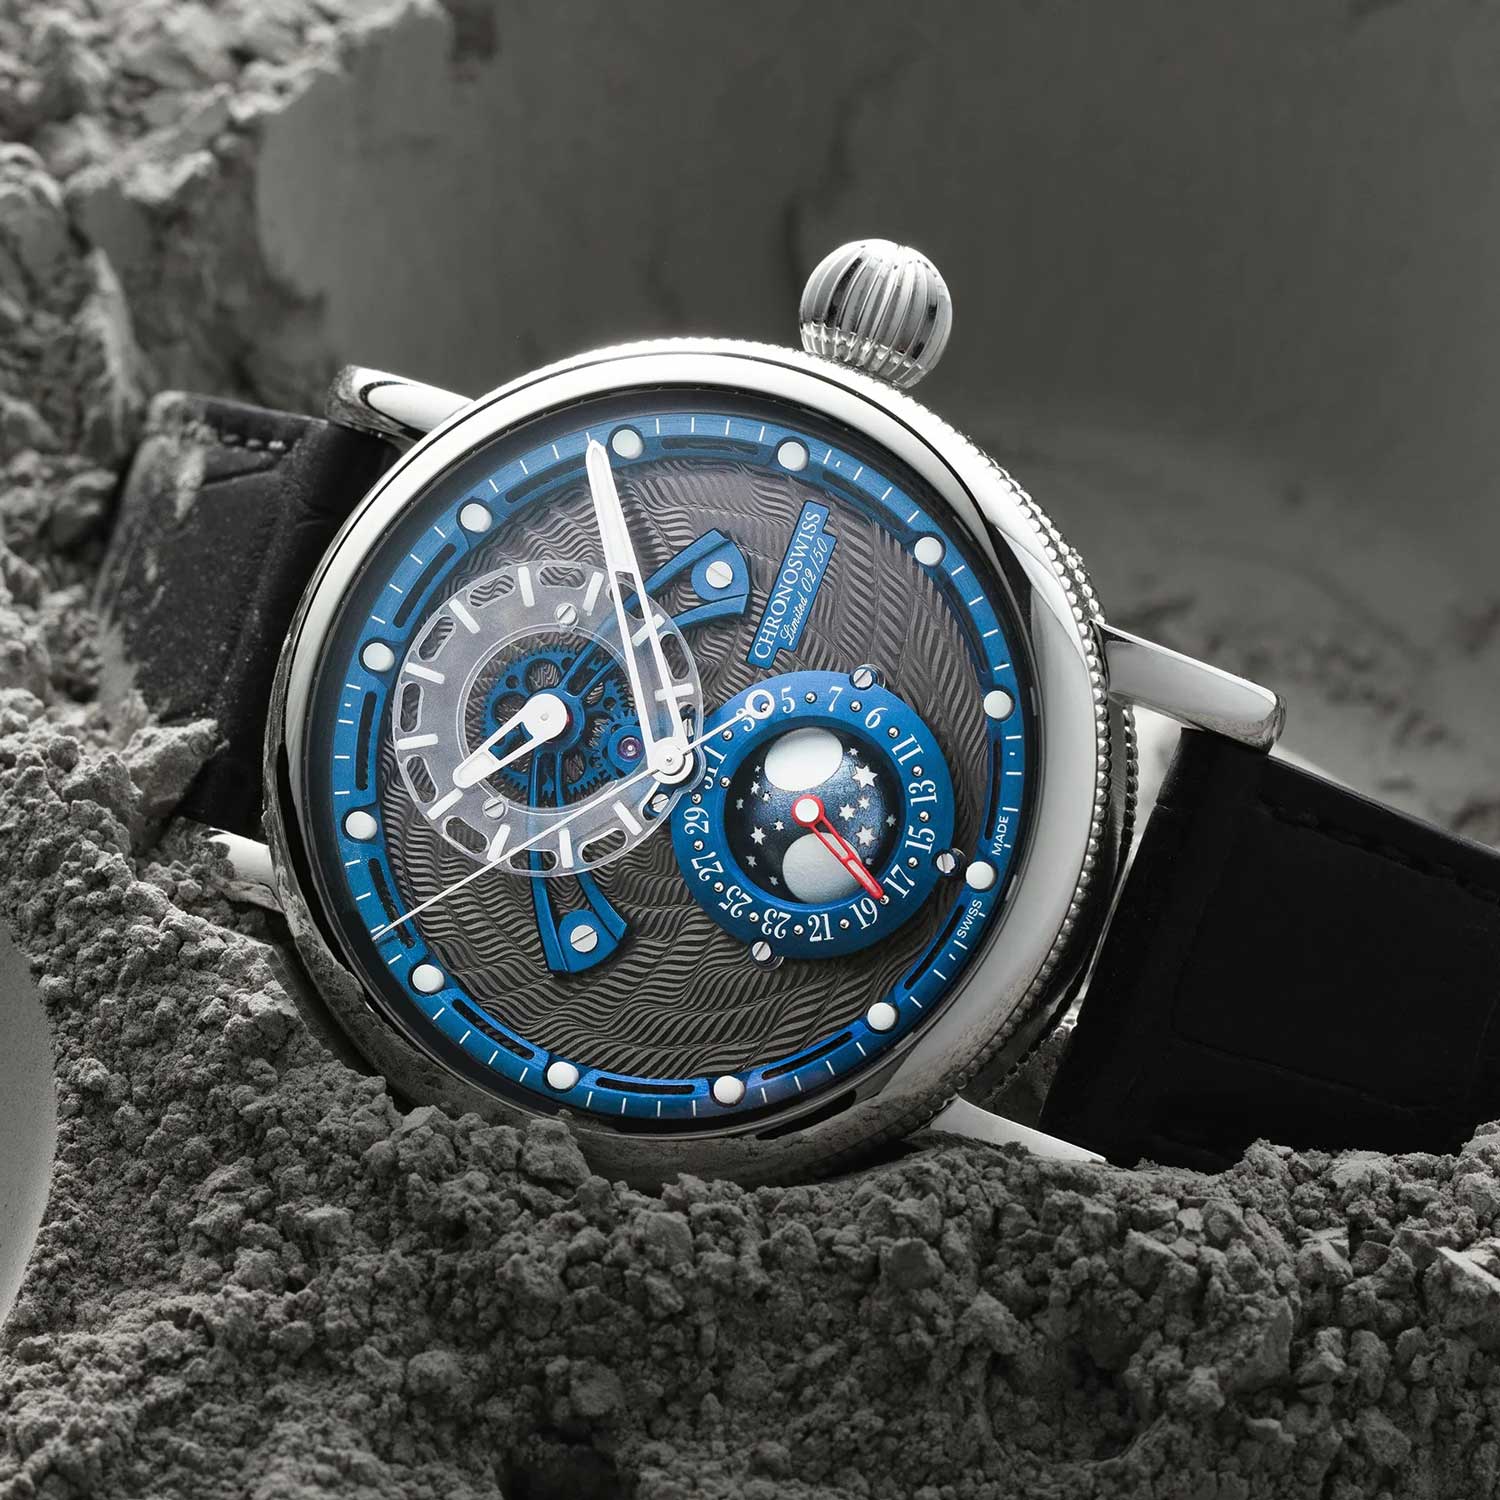 Chronoswiss Space Timer Moonwalk optimizes the brand’s know-how in hand guilloché